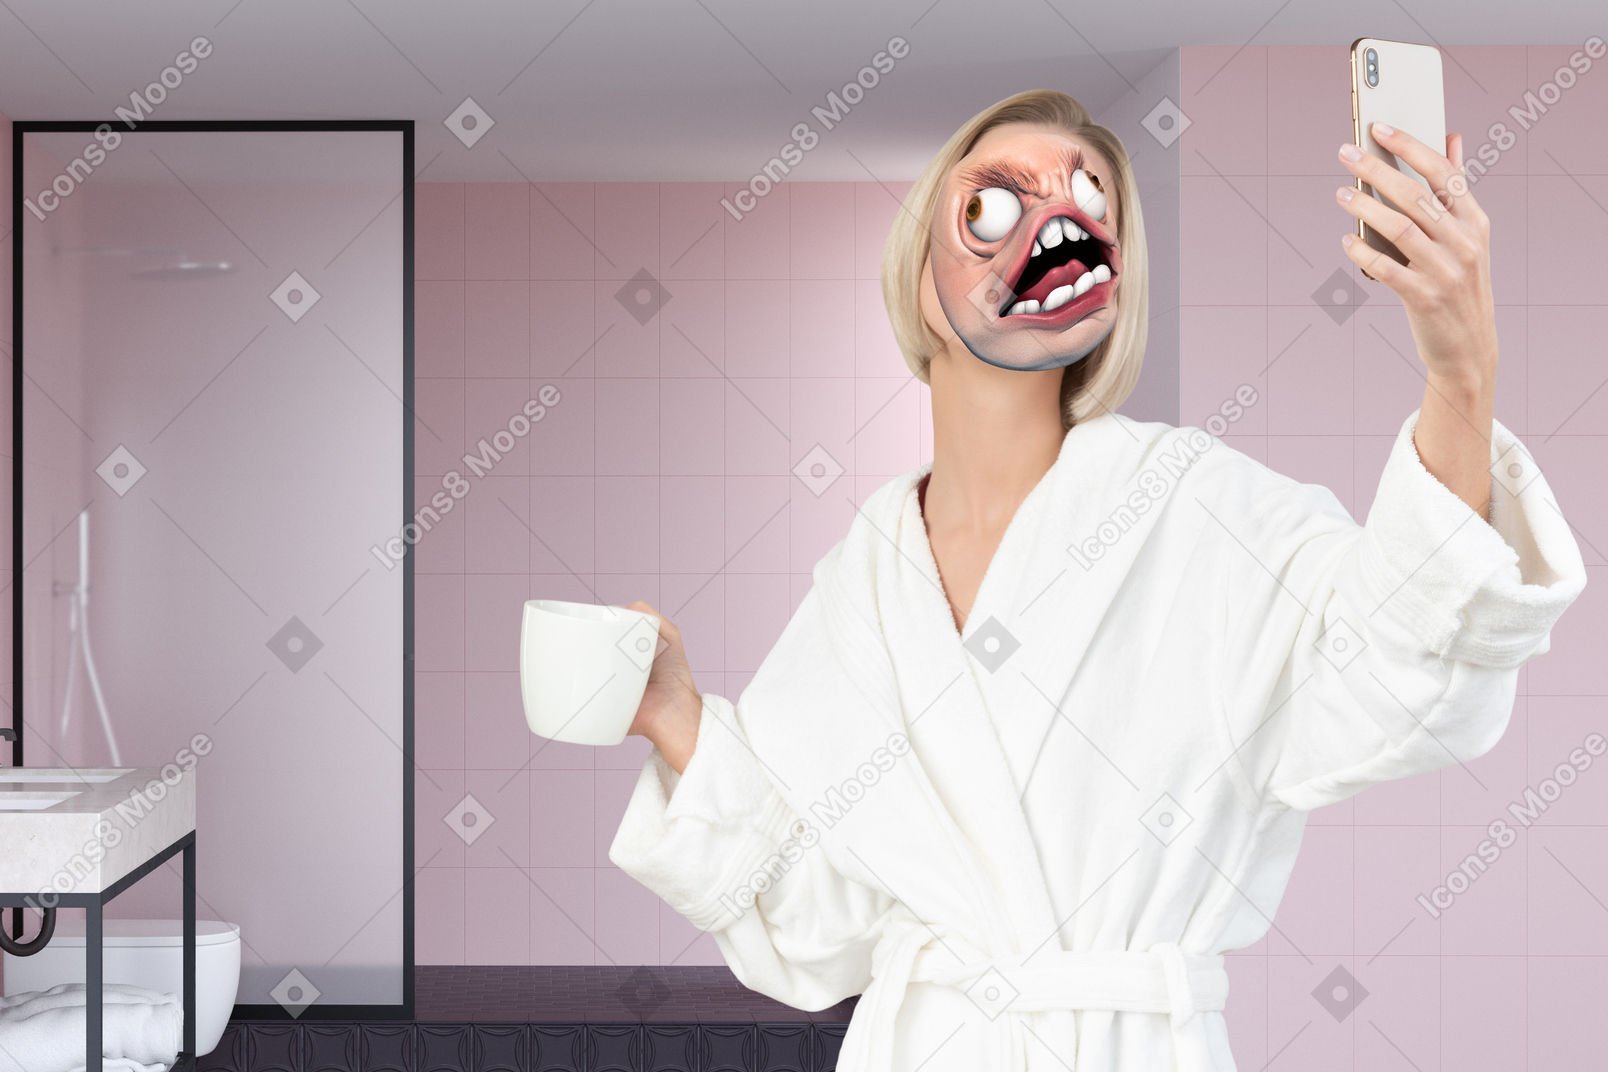 Woman with meme face taking a selfie in a bathroom